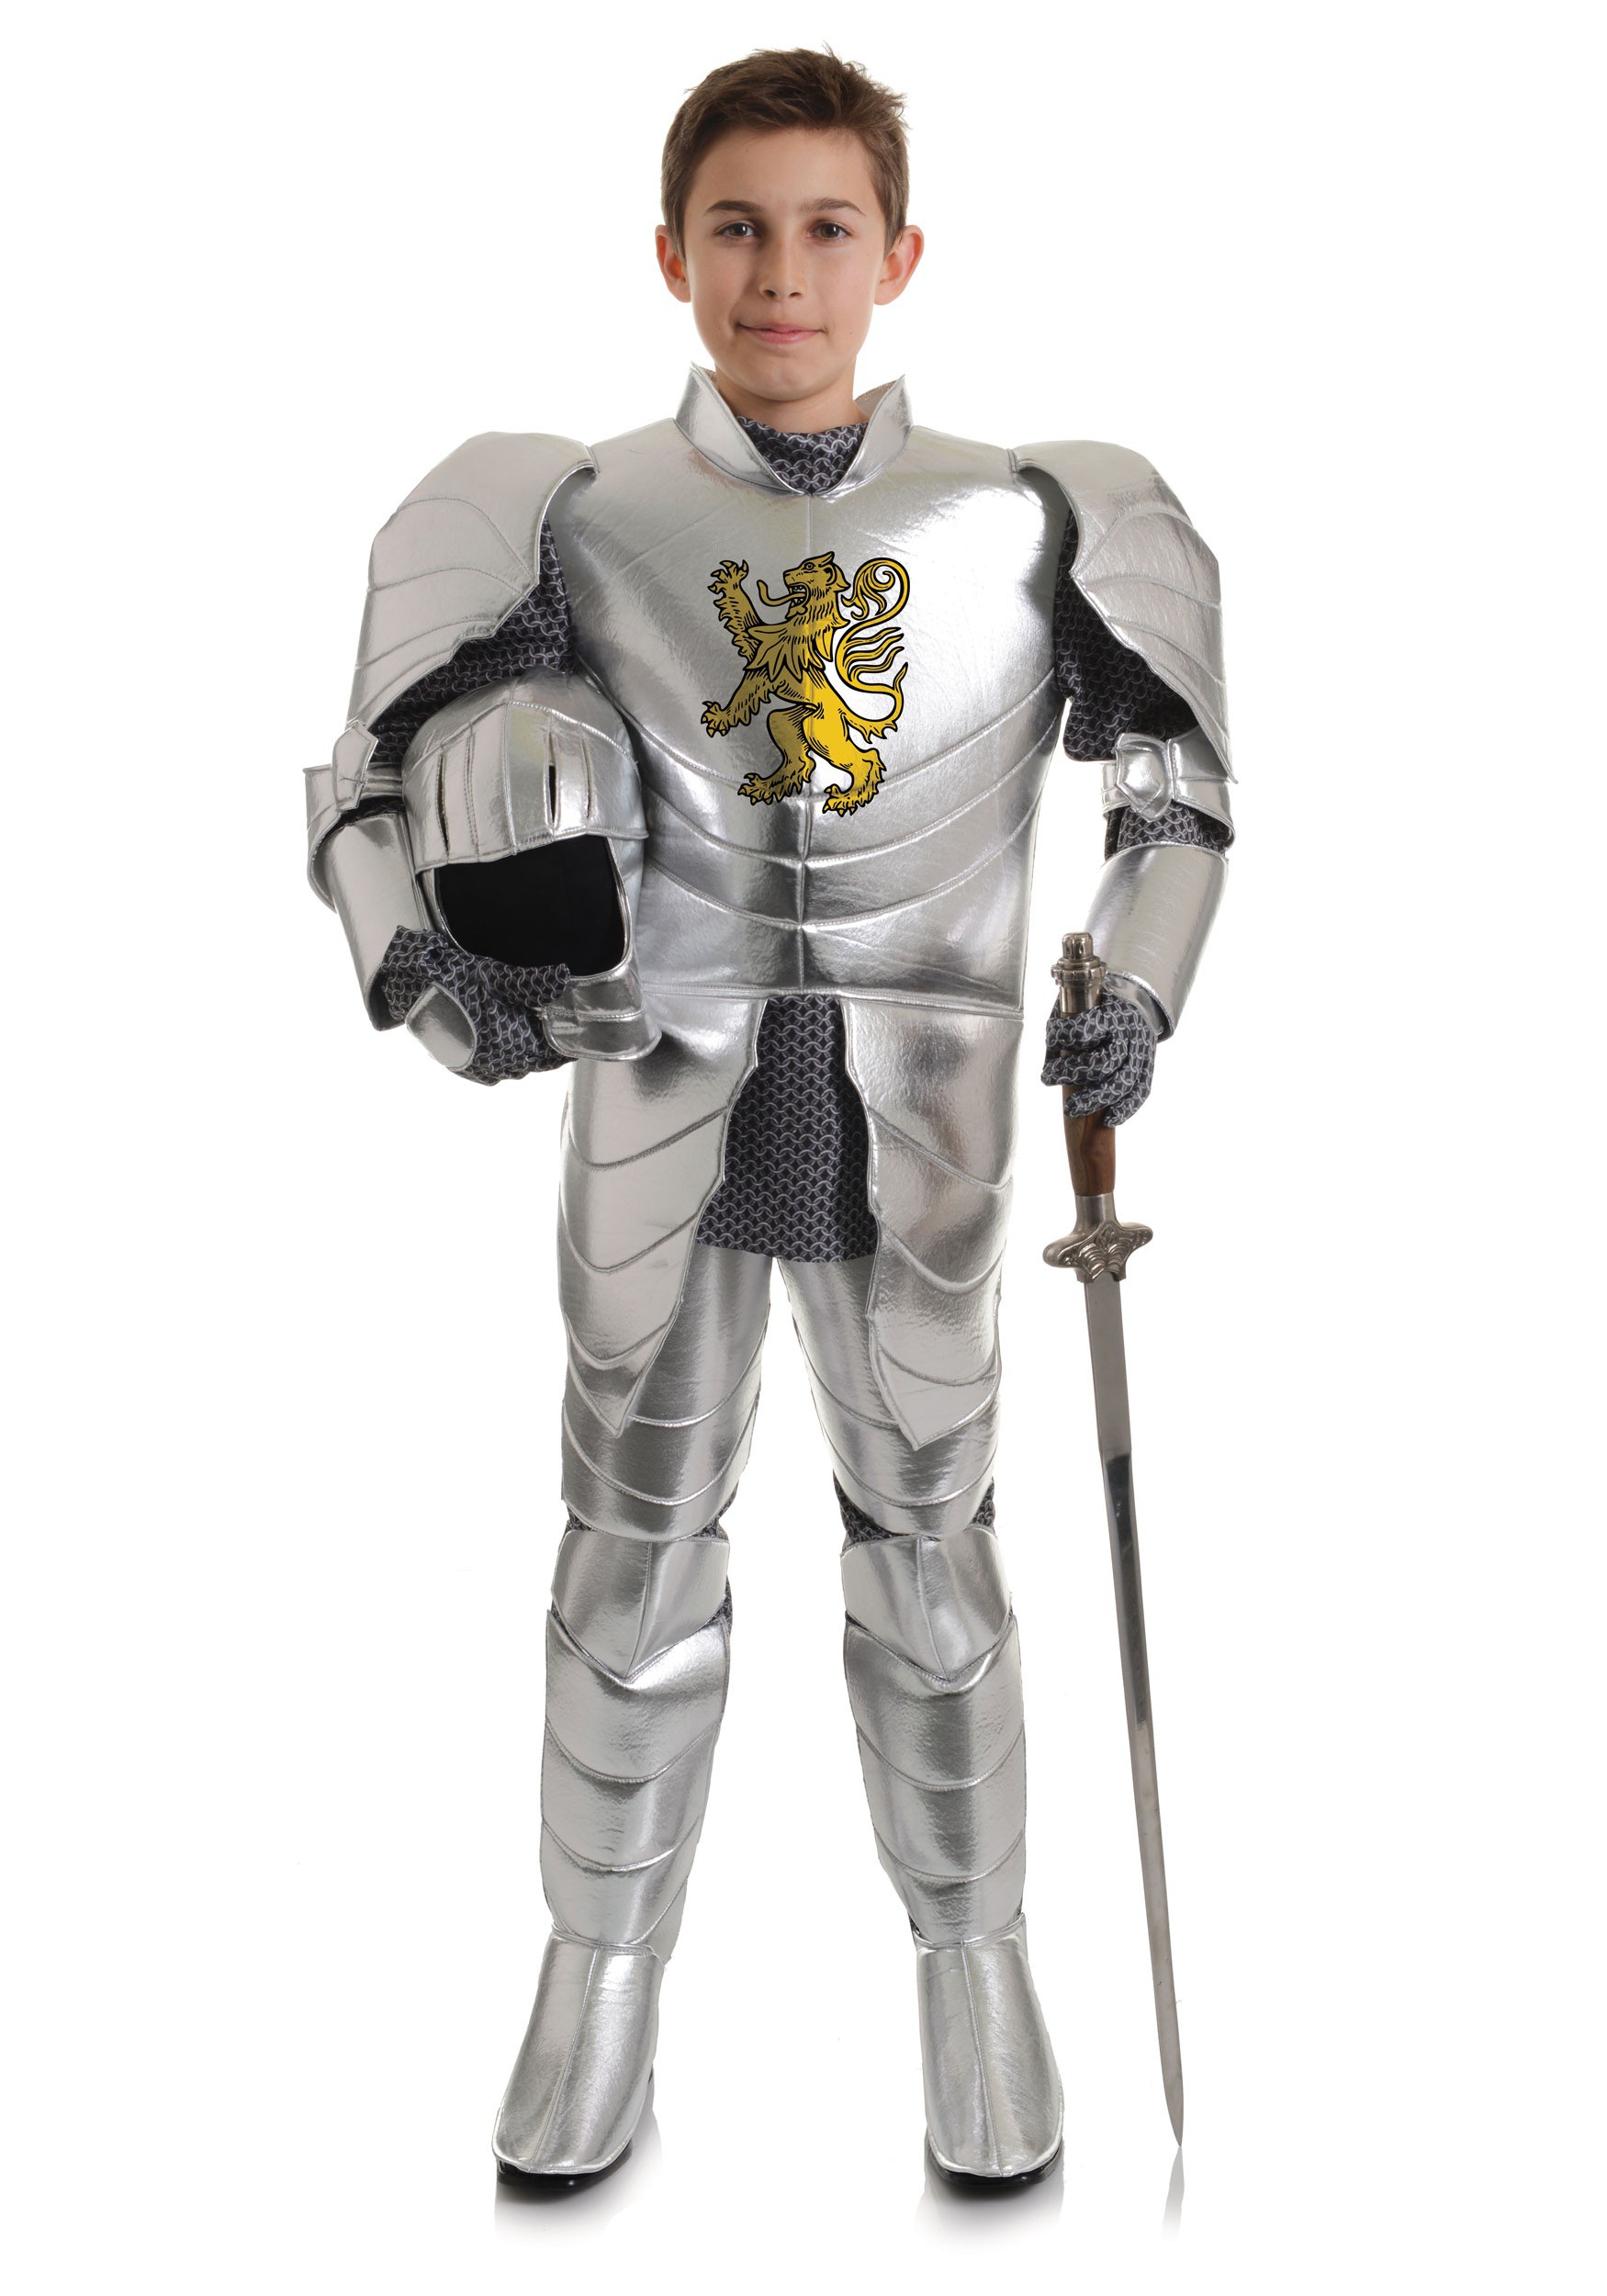 Knight Costume for Kids